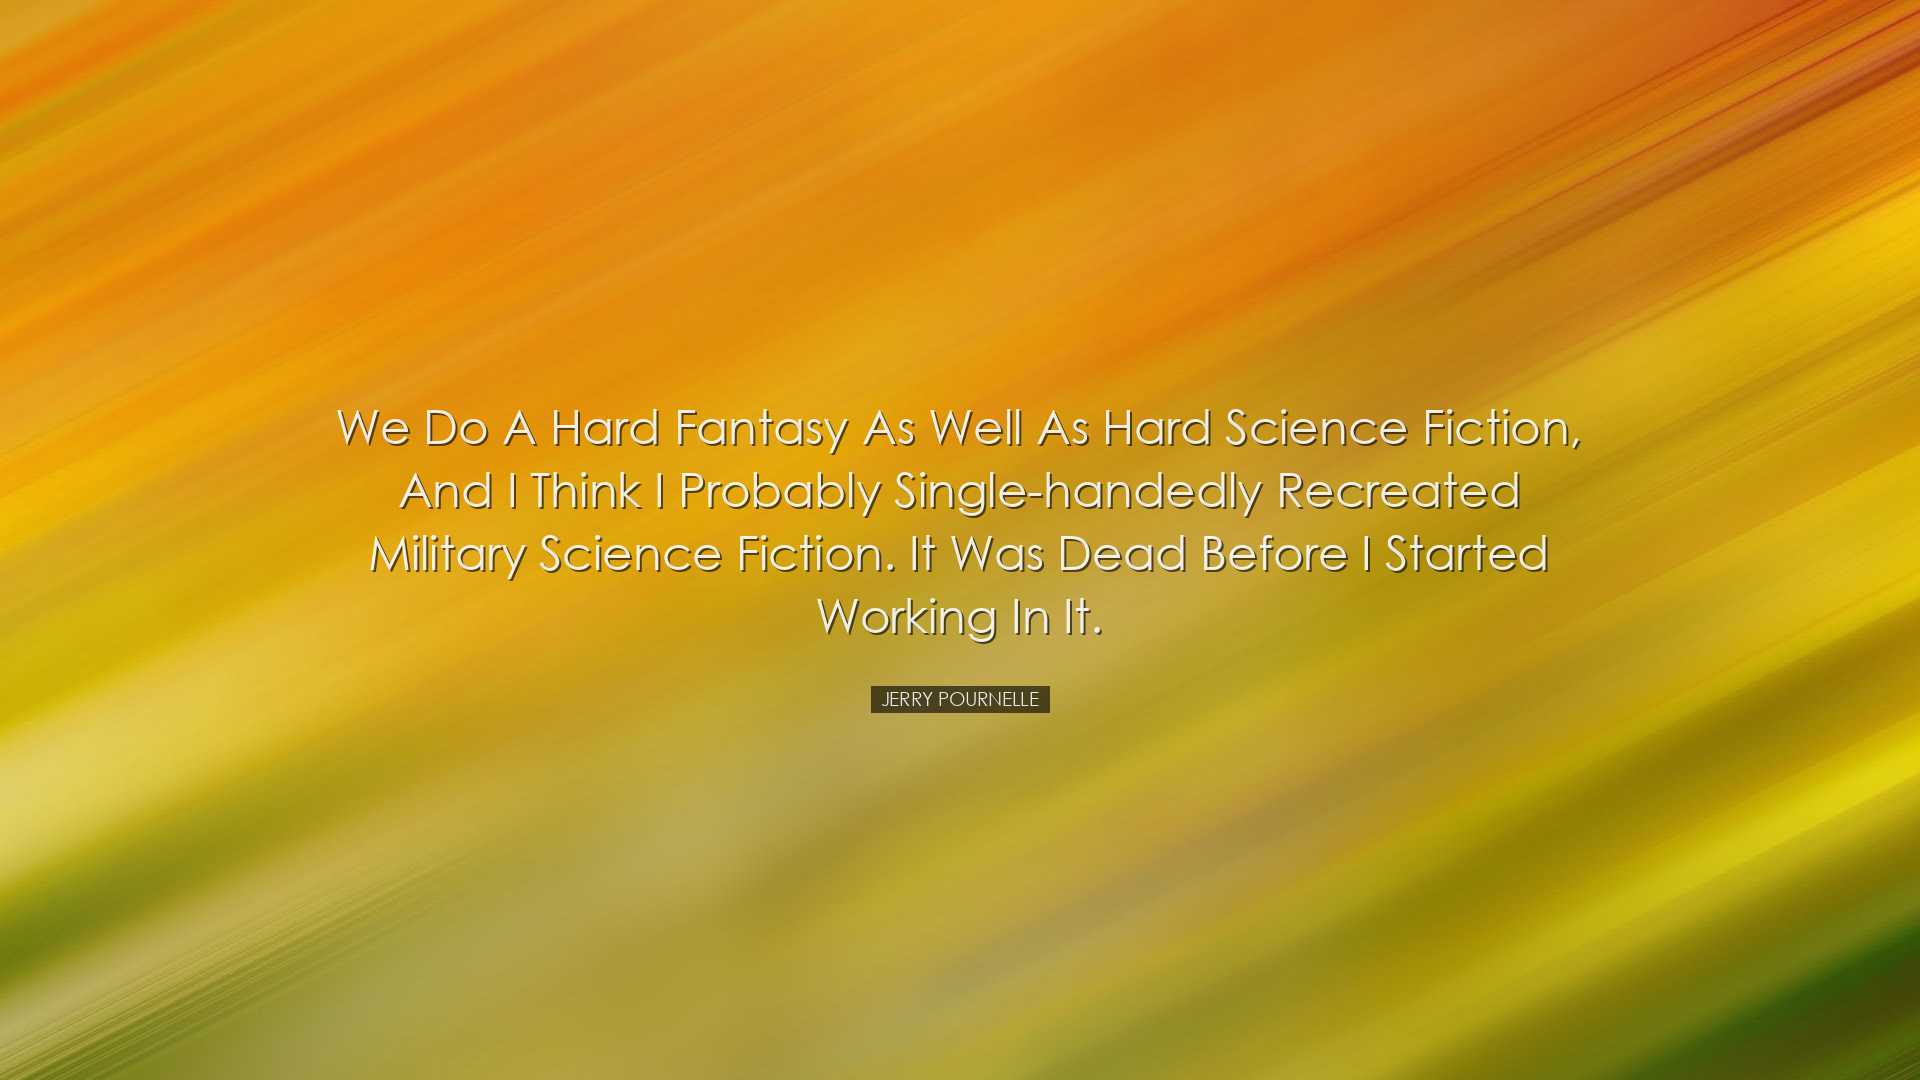 We do a hard fantasy as well as hard science fiction, and I think